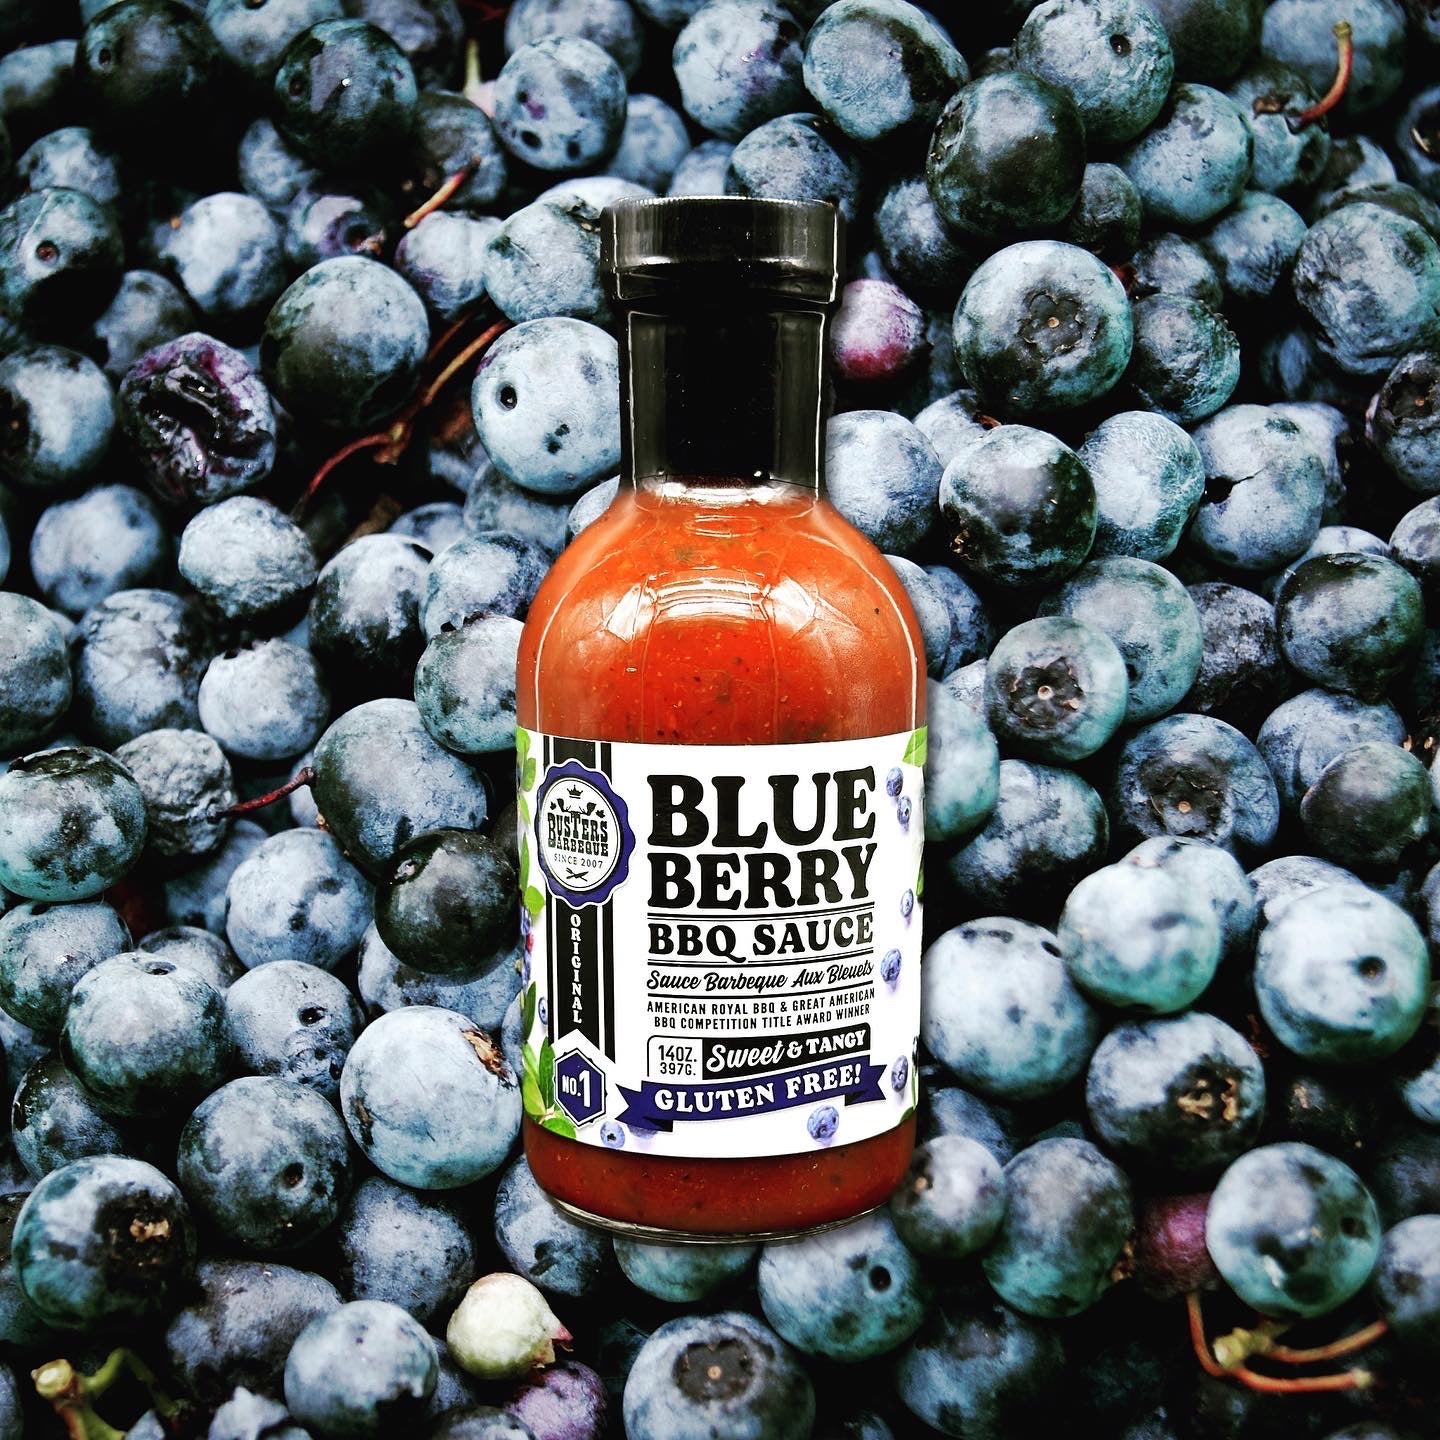 Busters Blueberry BBQ Sauce - Blueberry Original